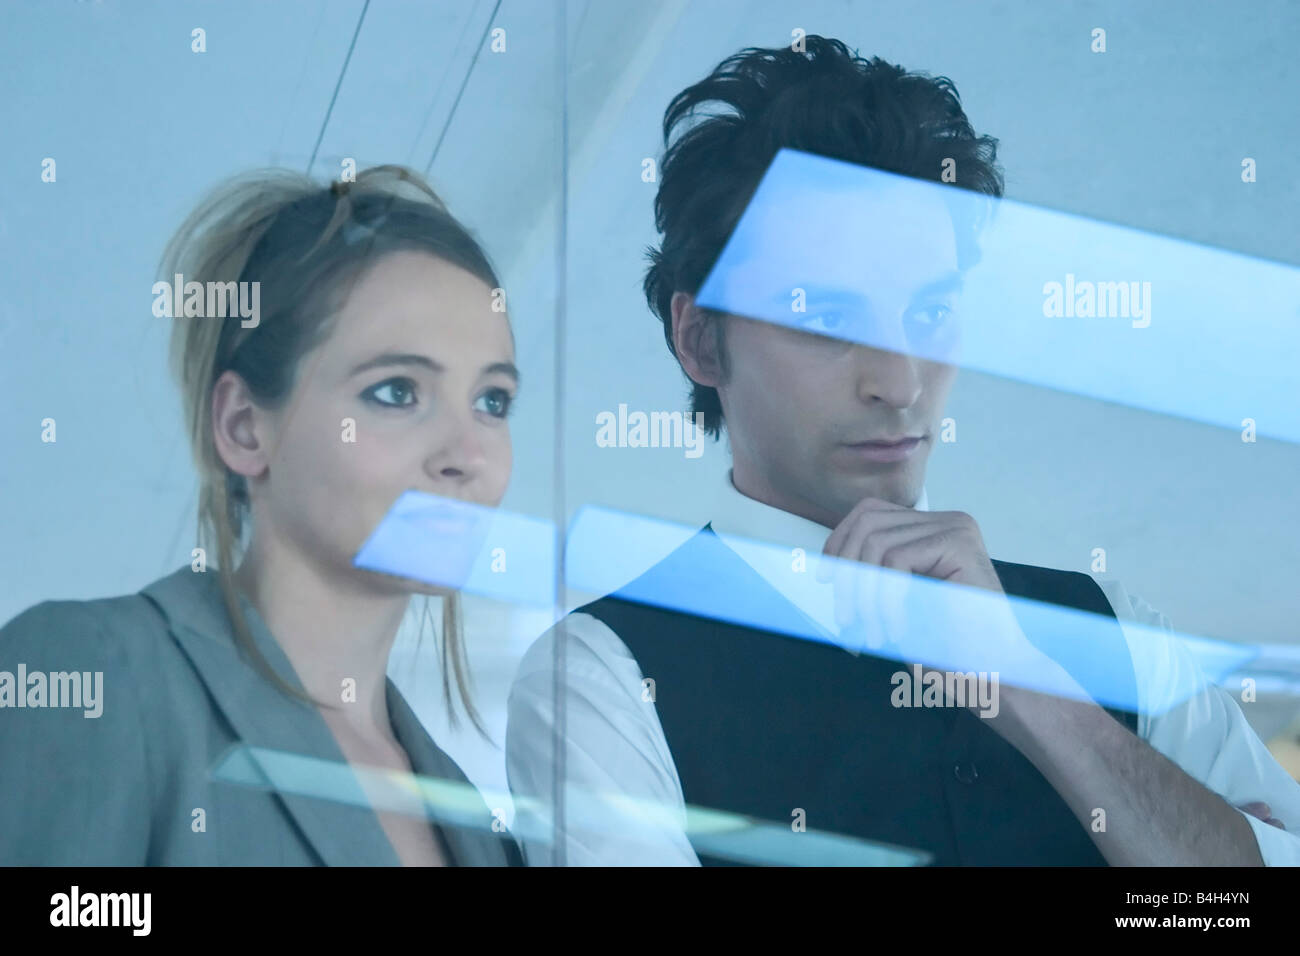 Businessman and businesswoman looking through window Banque D'Images